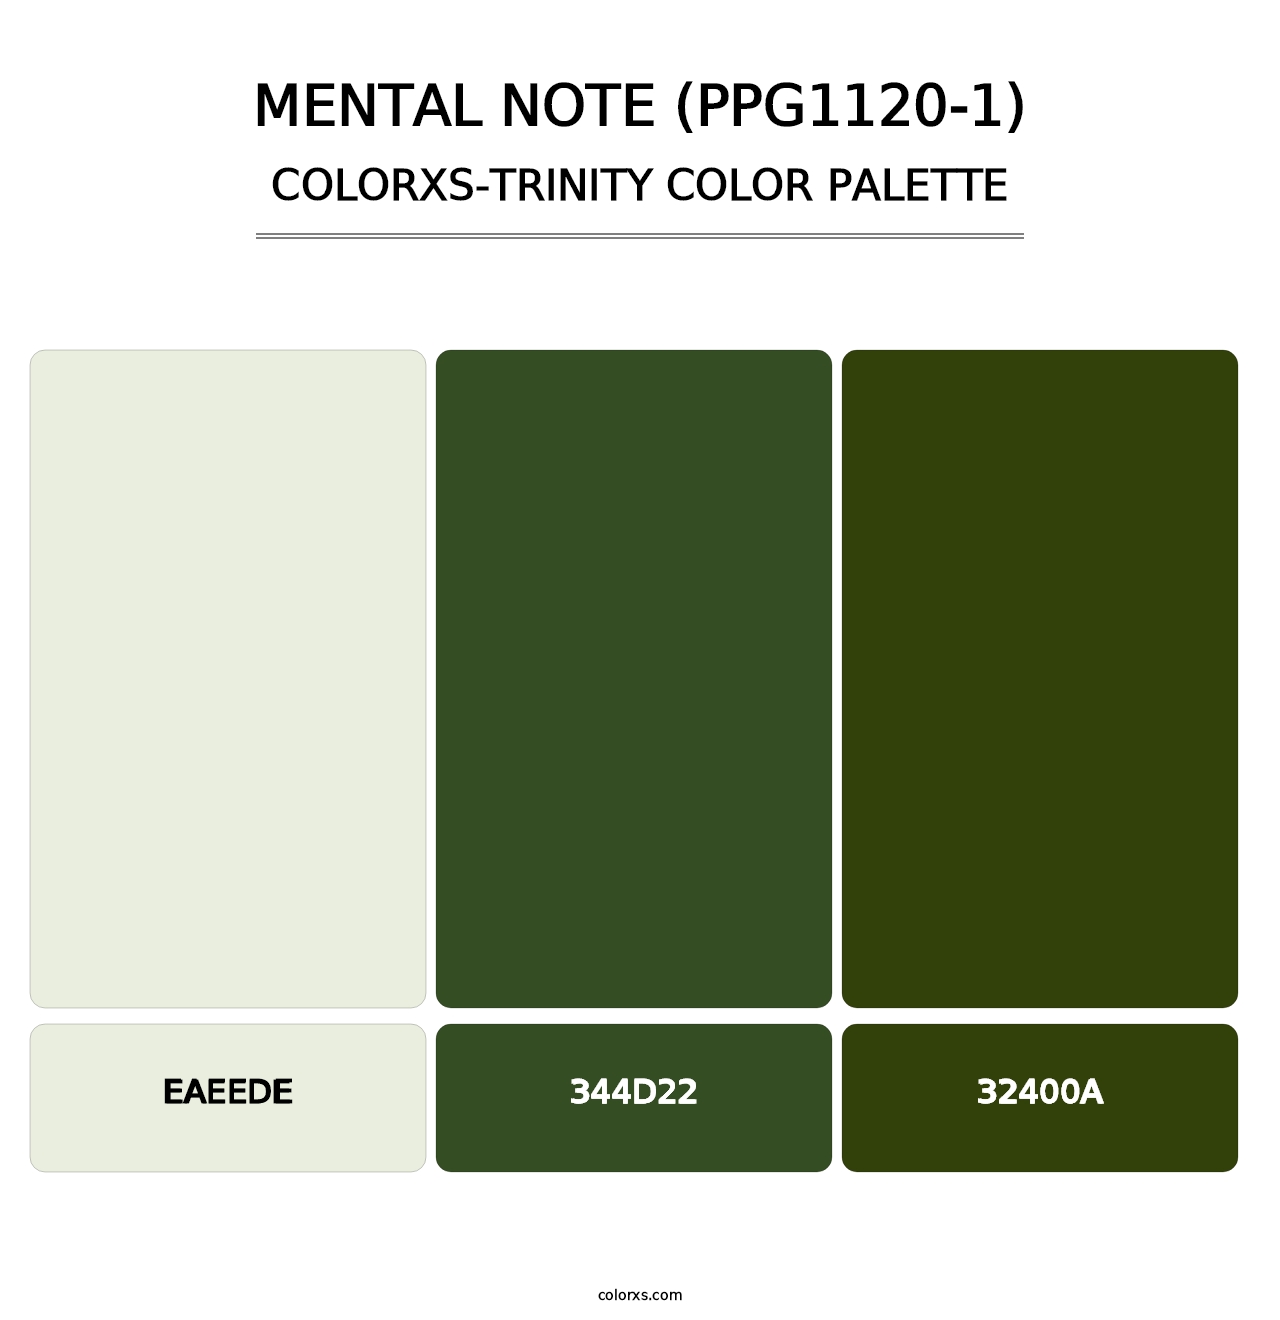 Mental Note (PPG1120-1) - Colorxs Trinity Palette